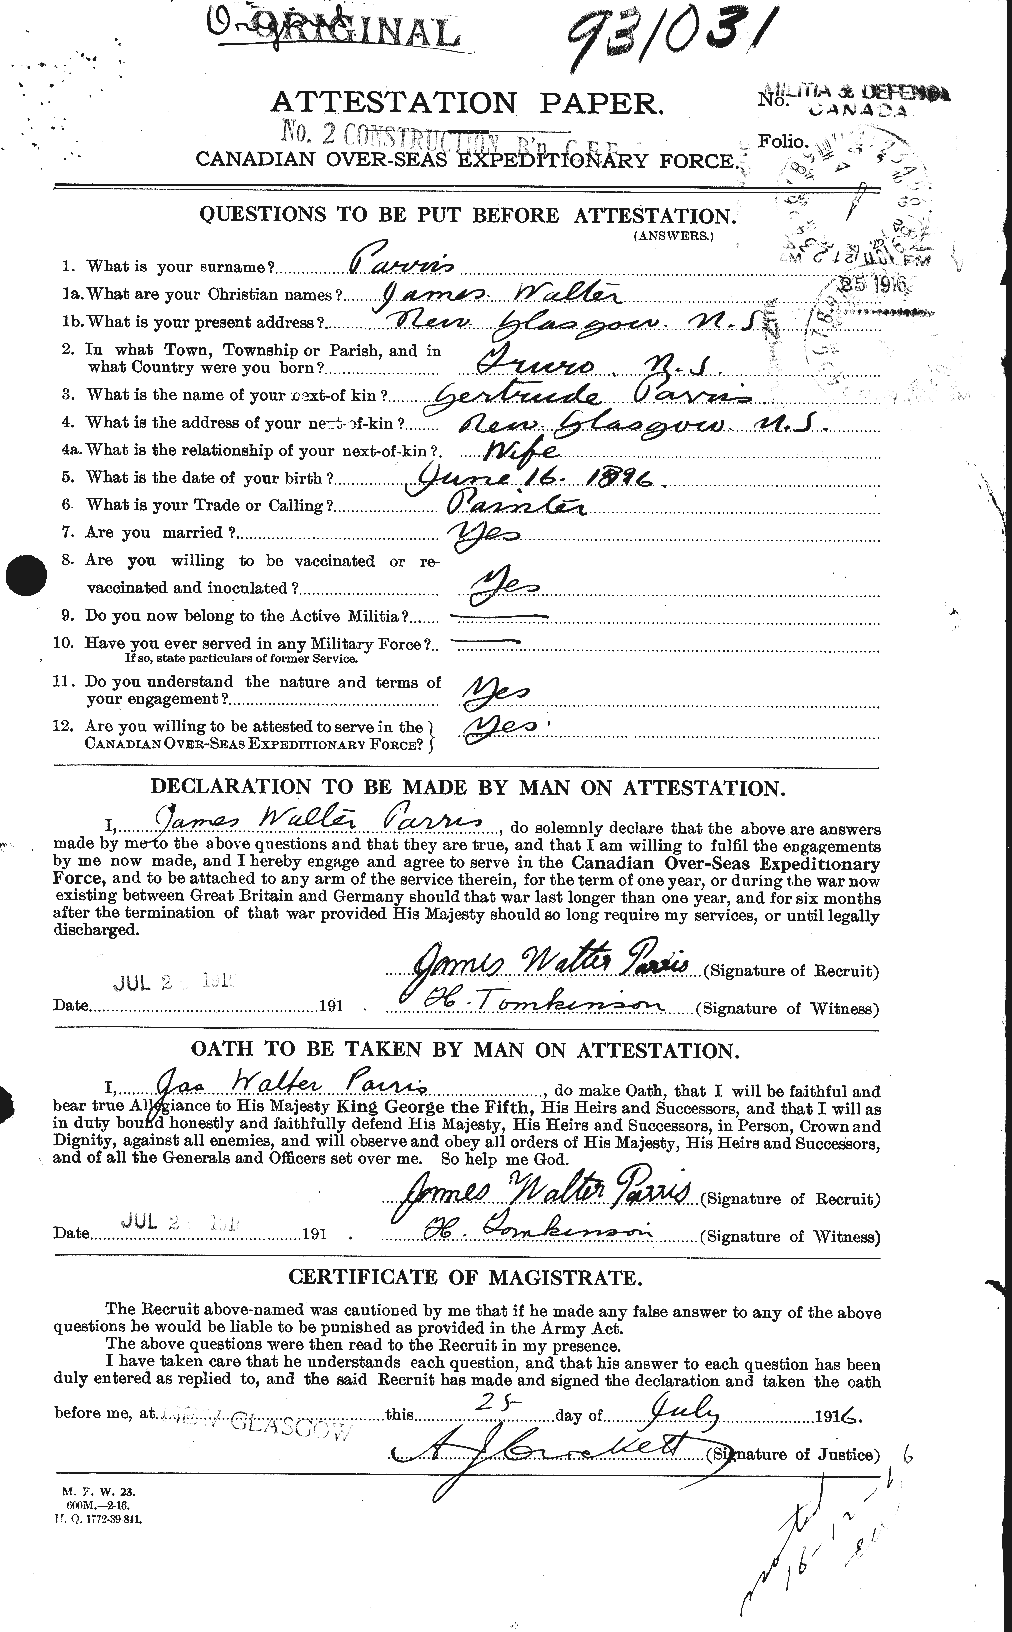 Personnel Records of the First World War - CEF 566510a